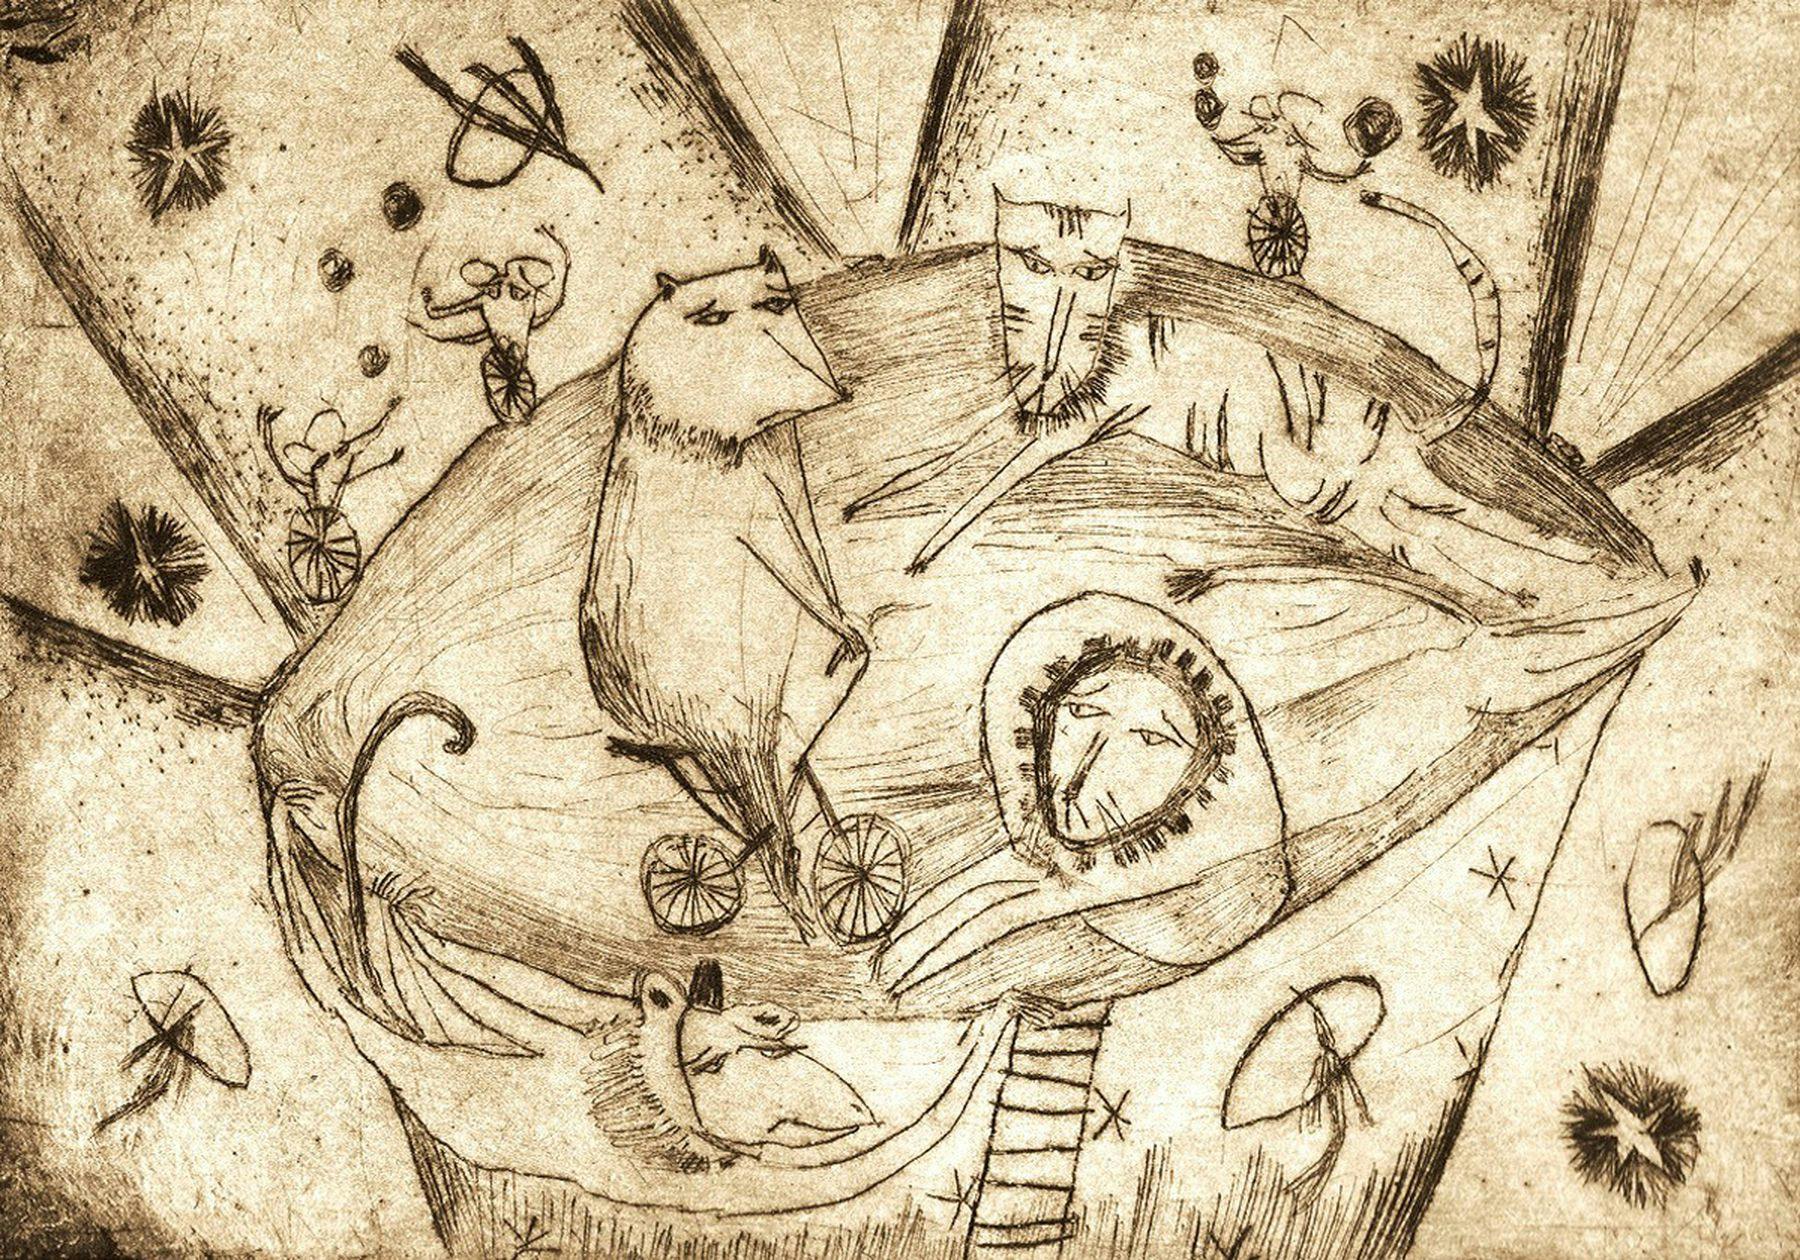 A pencil sketch of different animals including mice, a lion, two badgers and a lion. Some of them are riding on unicycles and bicycles.